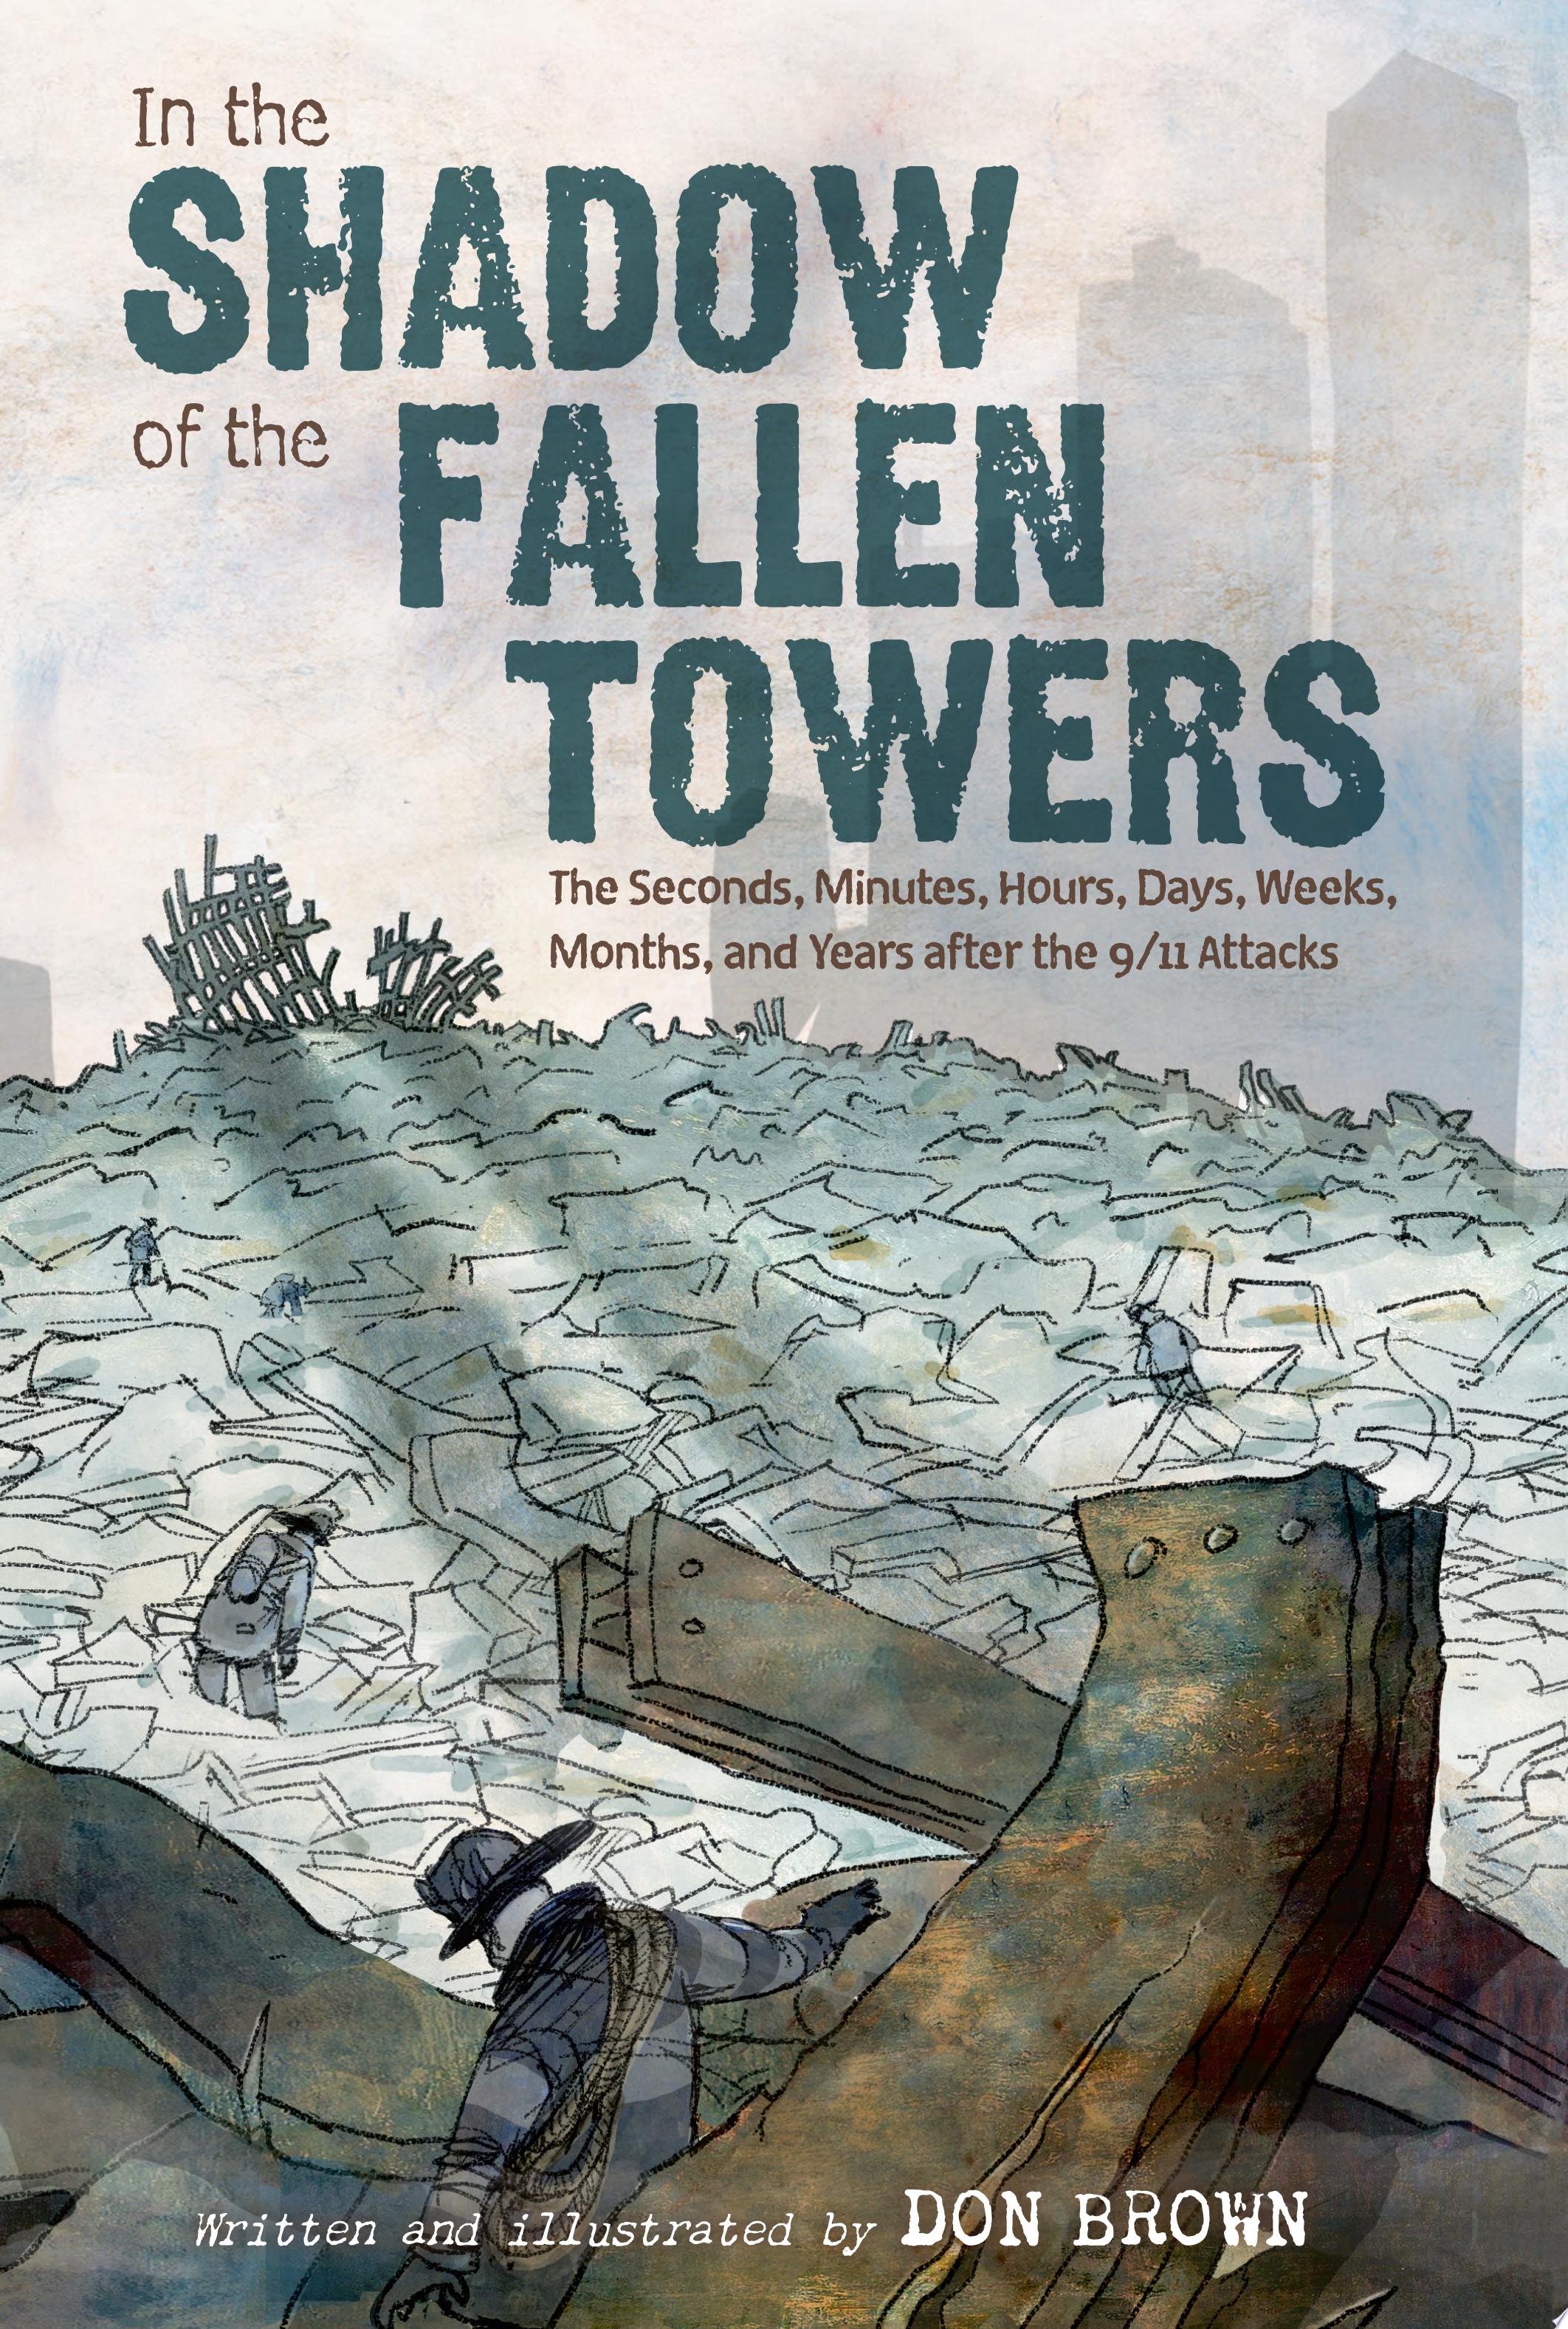 Image for "In the Shadow of the Fallen Towers"